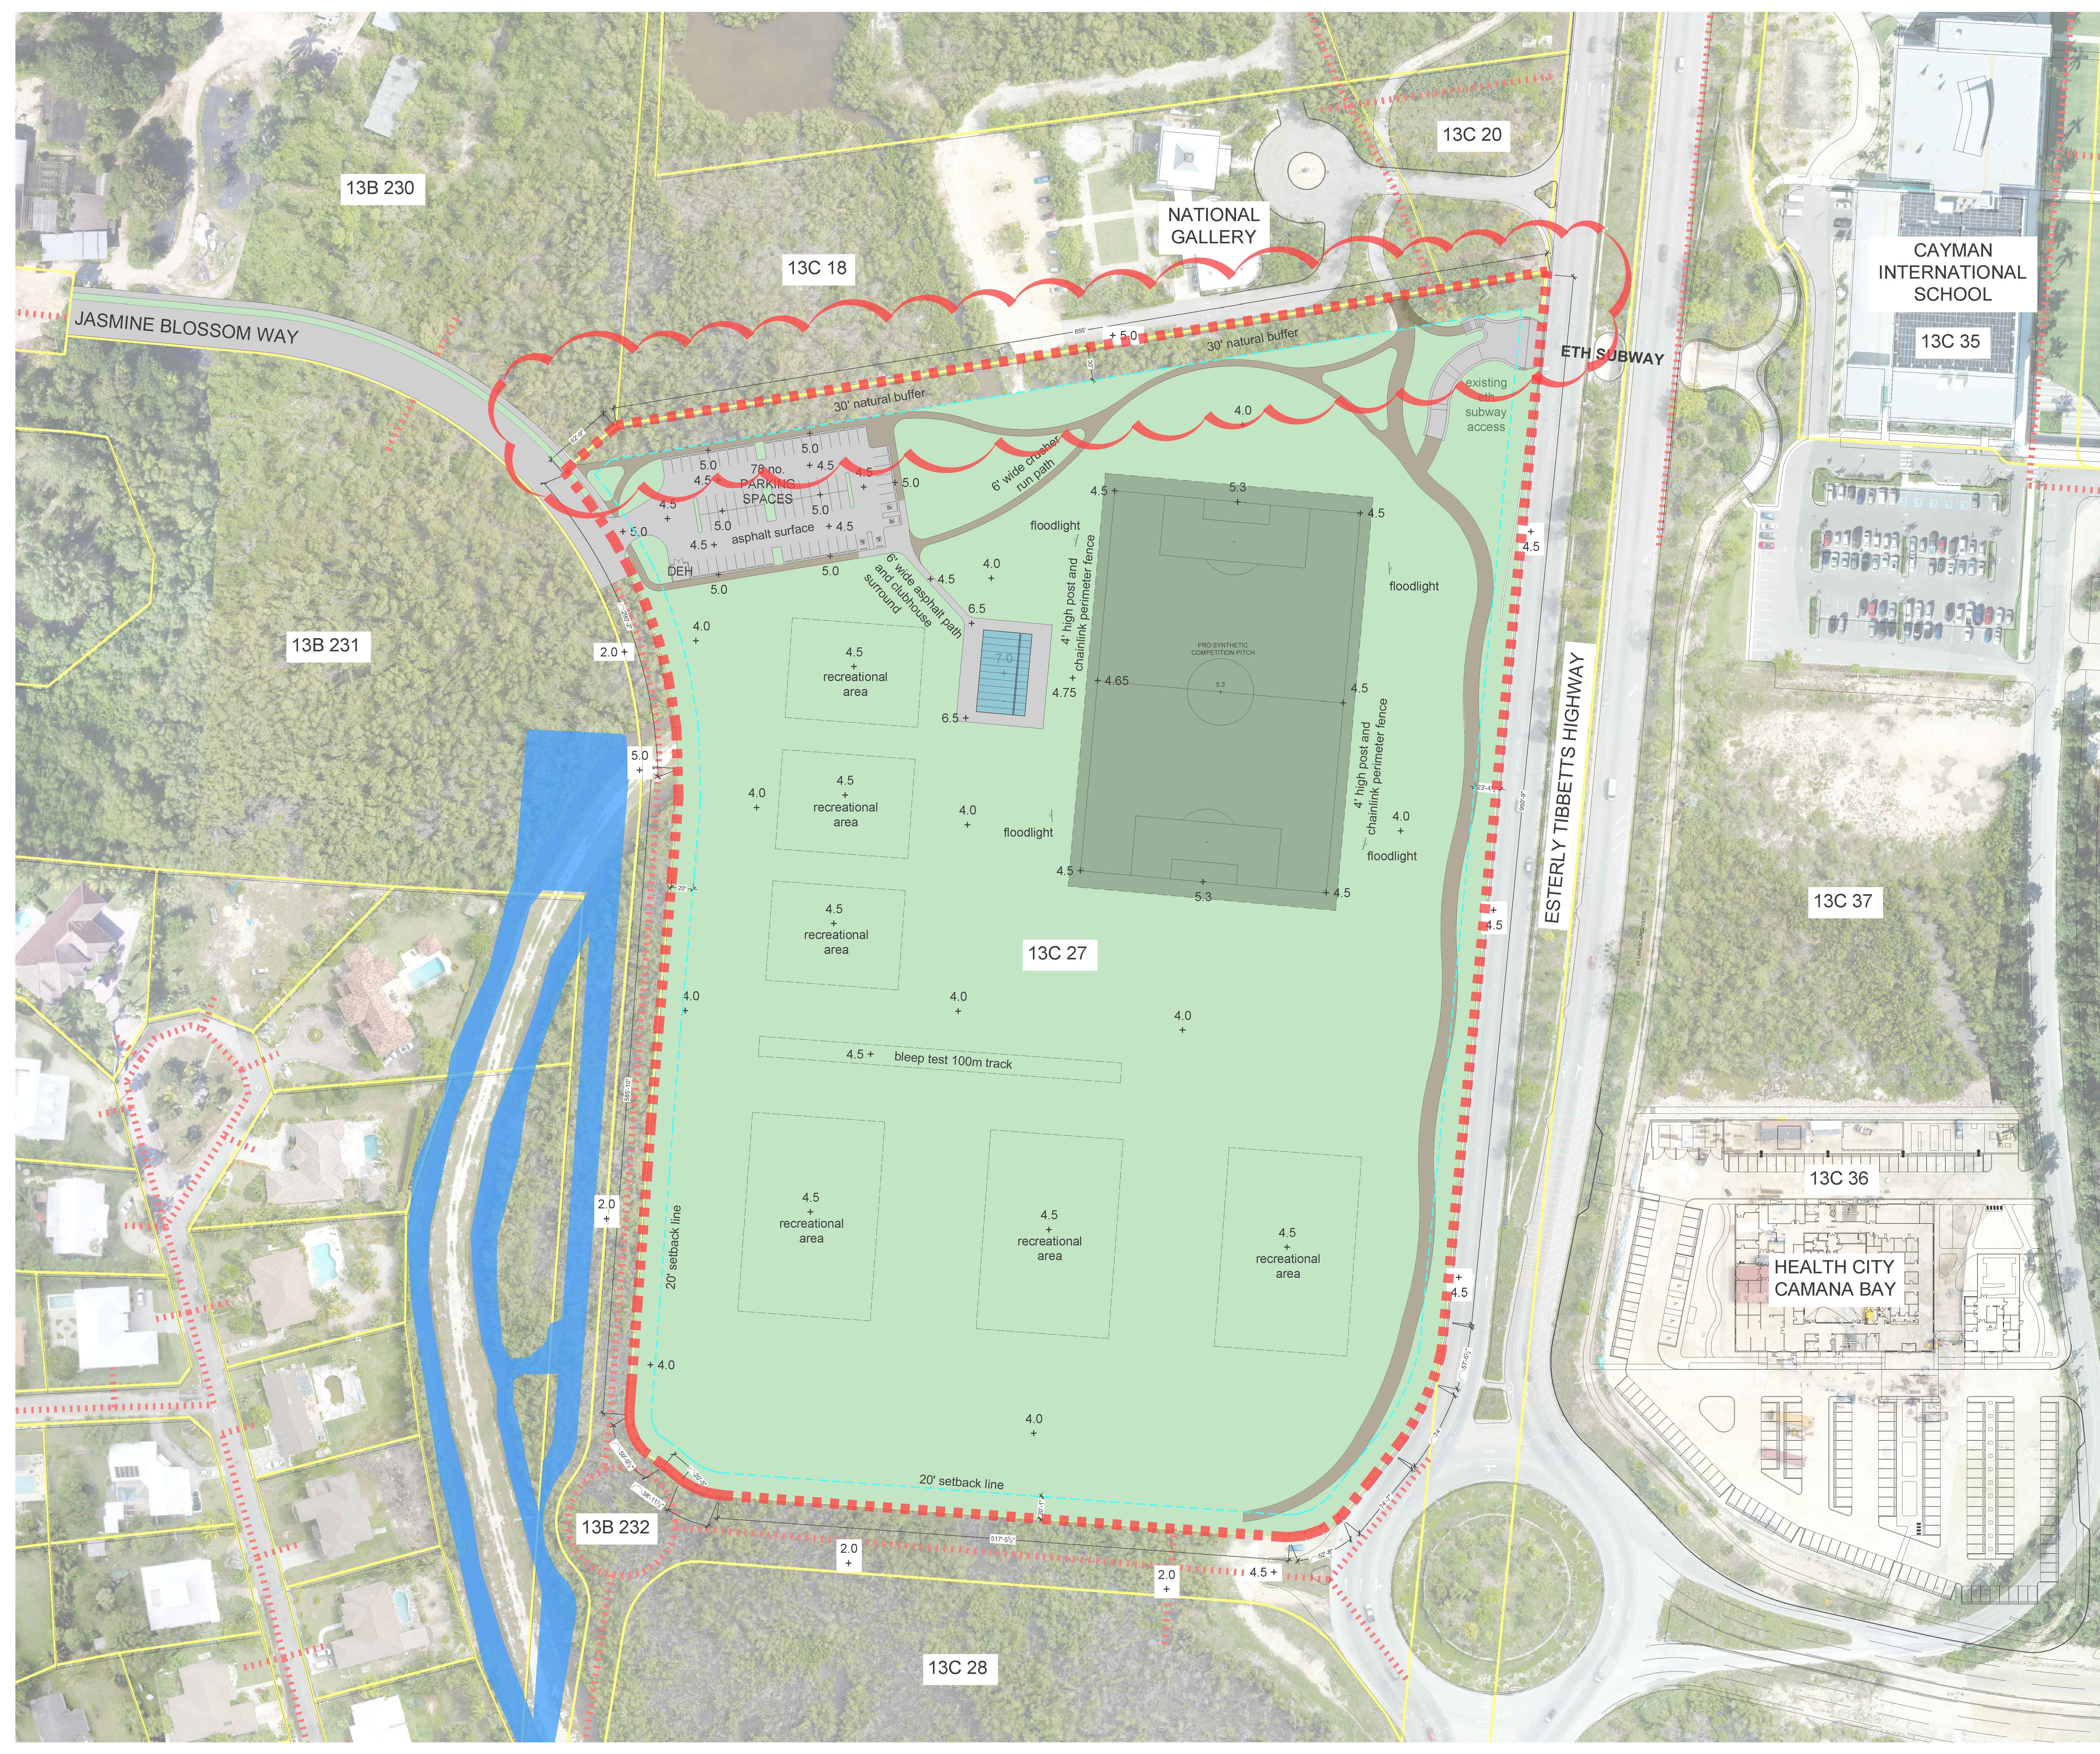 New sports field approved for Camana Bay